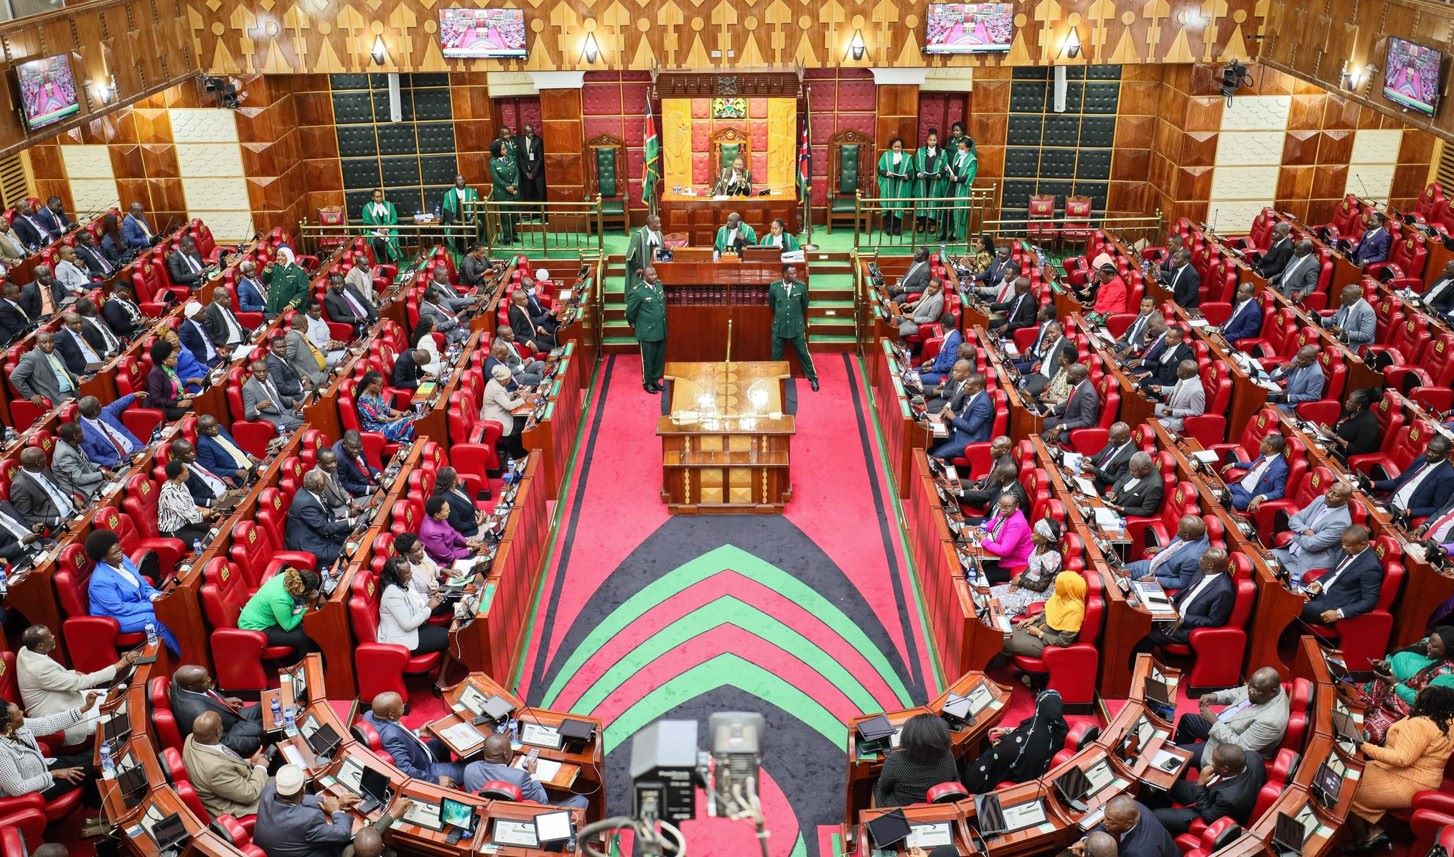 MPs to proceed on early recess after Tuesday's deadly protests, passage of Finance Bill